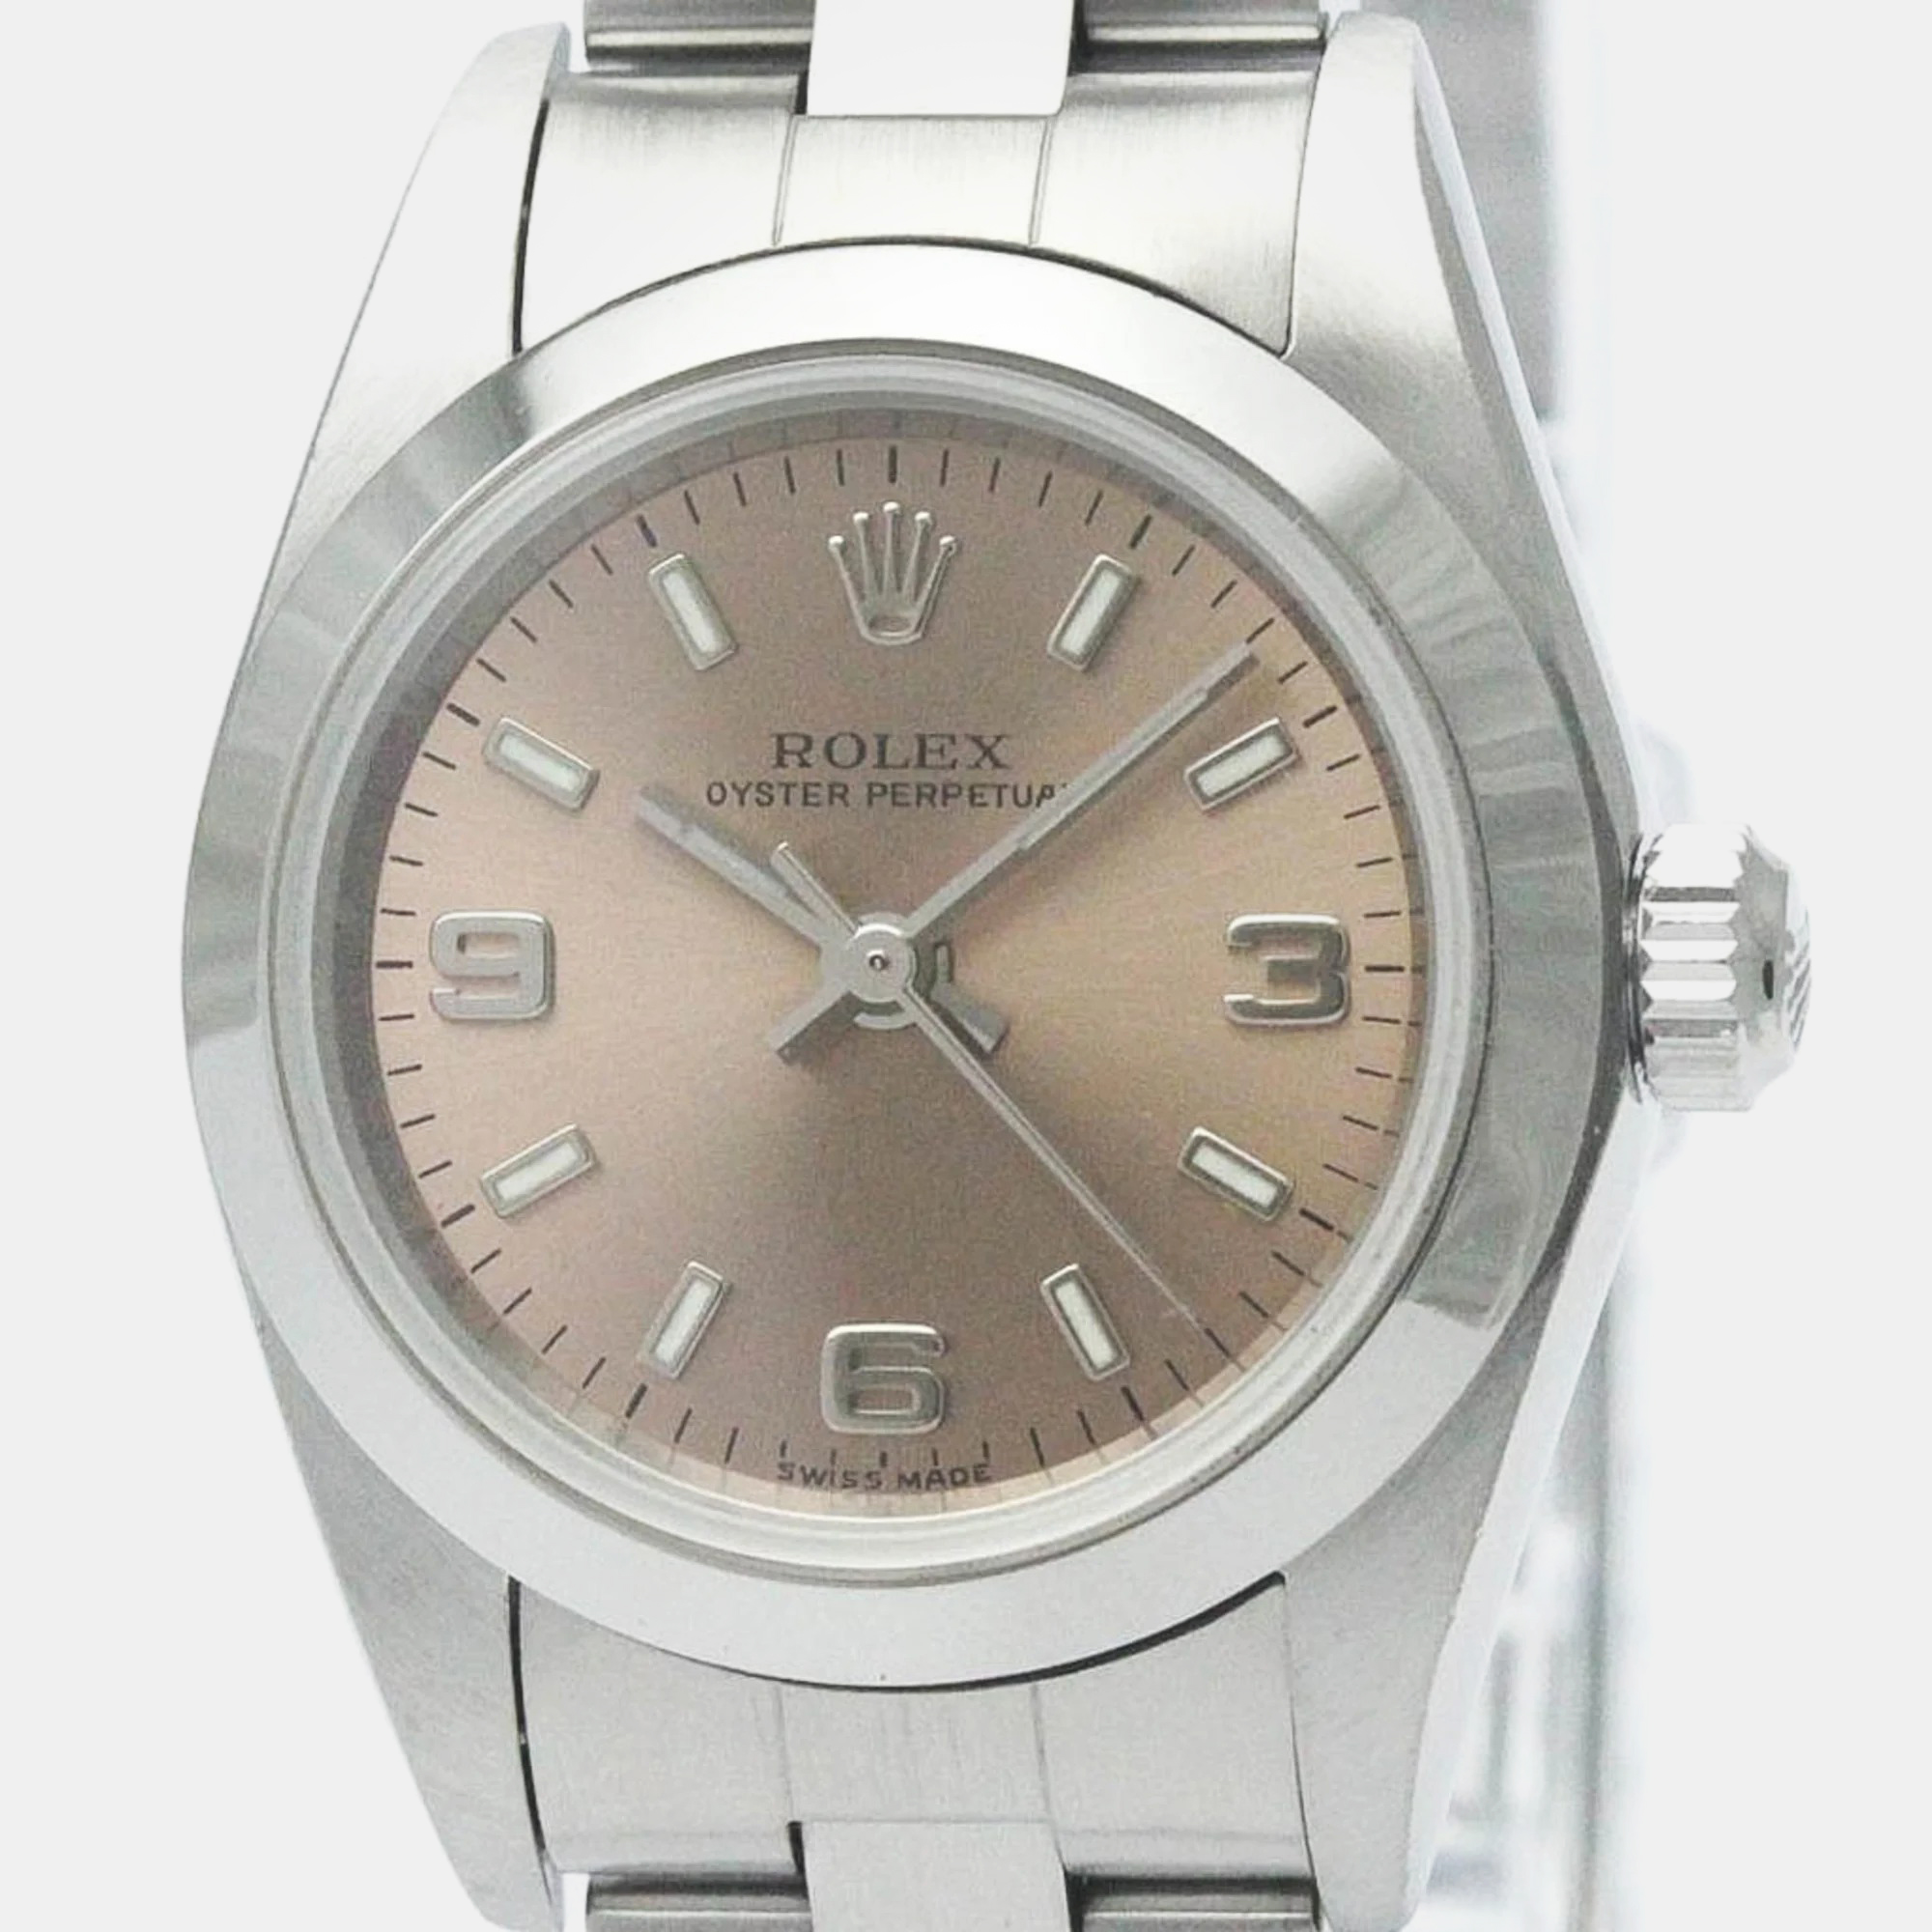 

Rolex Orange Stainless Steel Oyster Perpetual 76080 Automatic Women's Wristwatch 24 mm